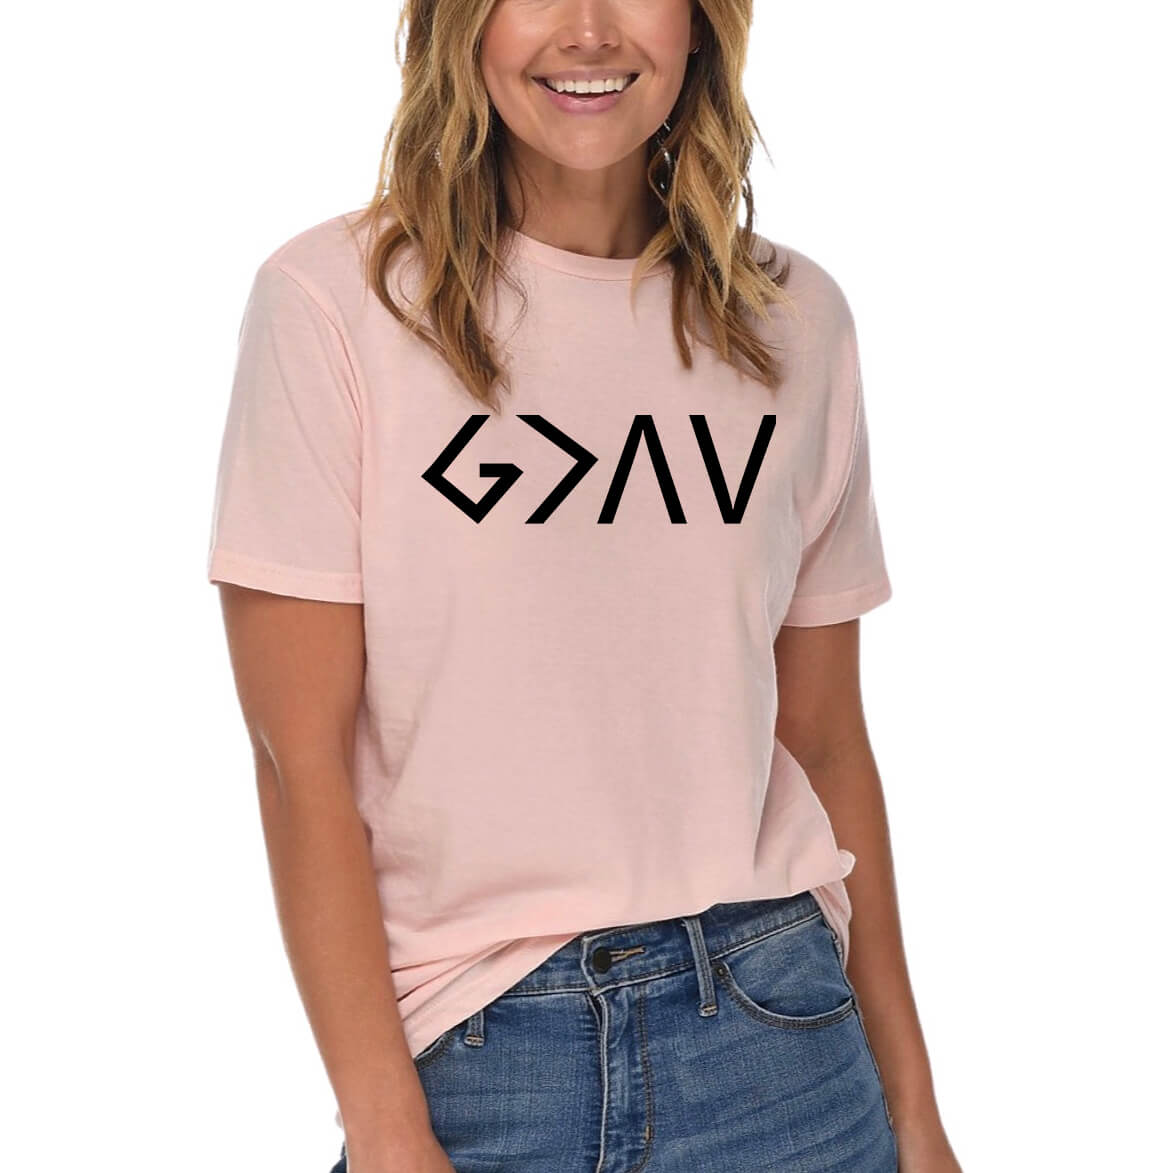 God Is Greater Than The Highs and Lows T-Shirt